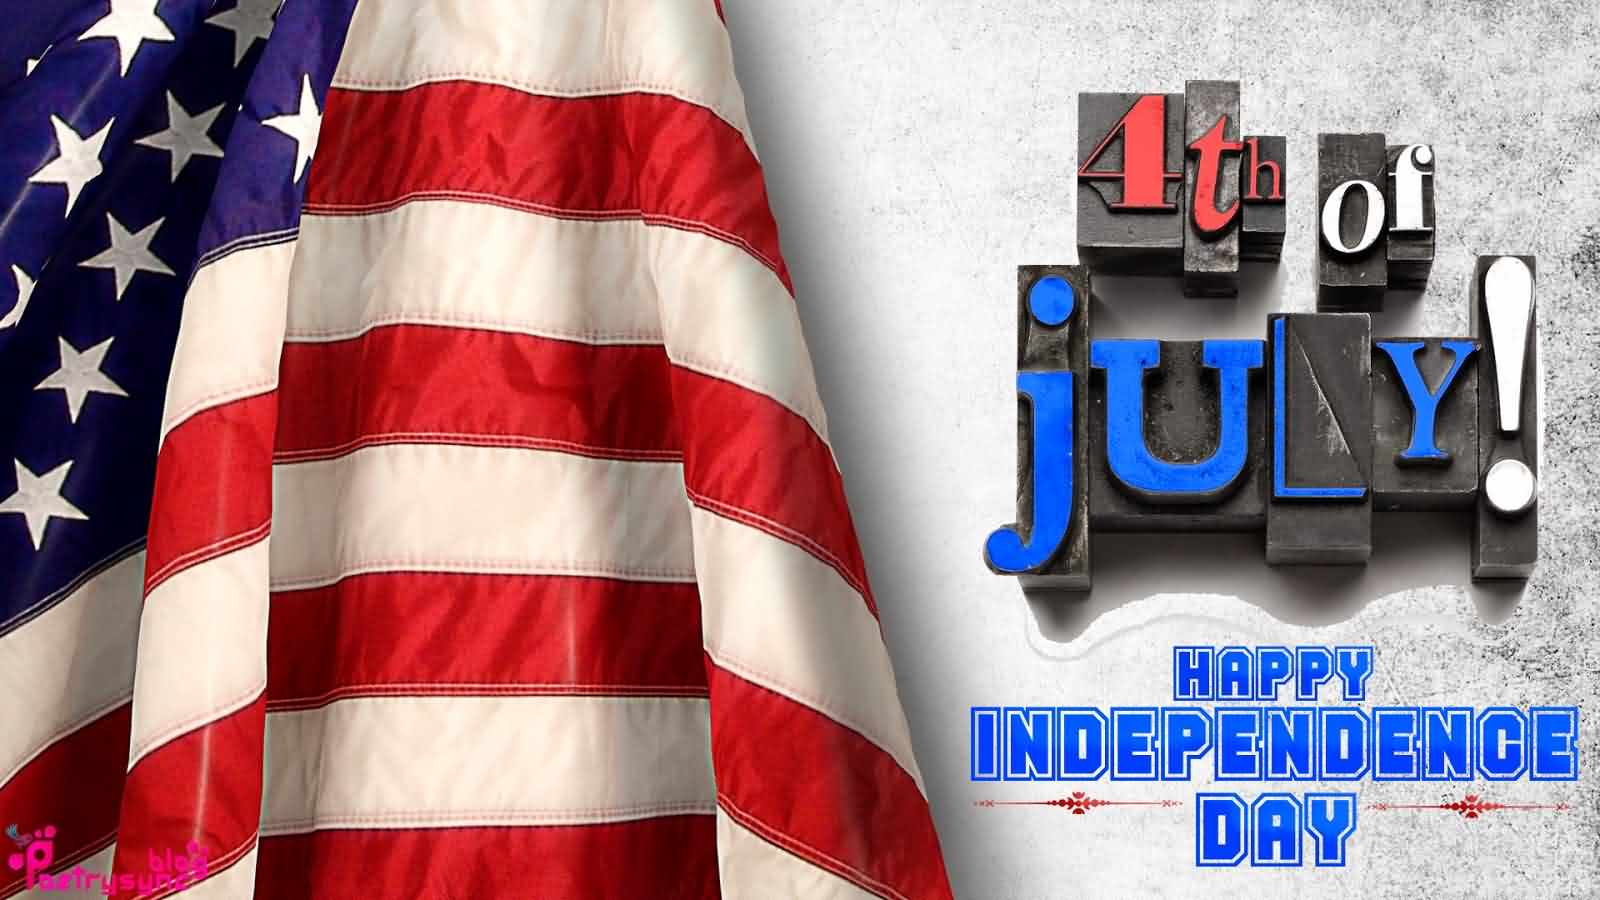 4th July Happy Independence Day Wishes Images